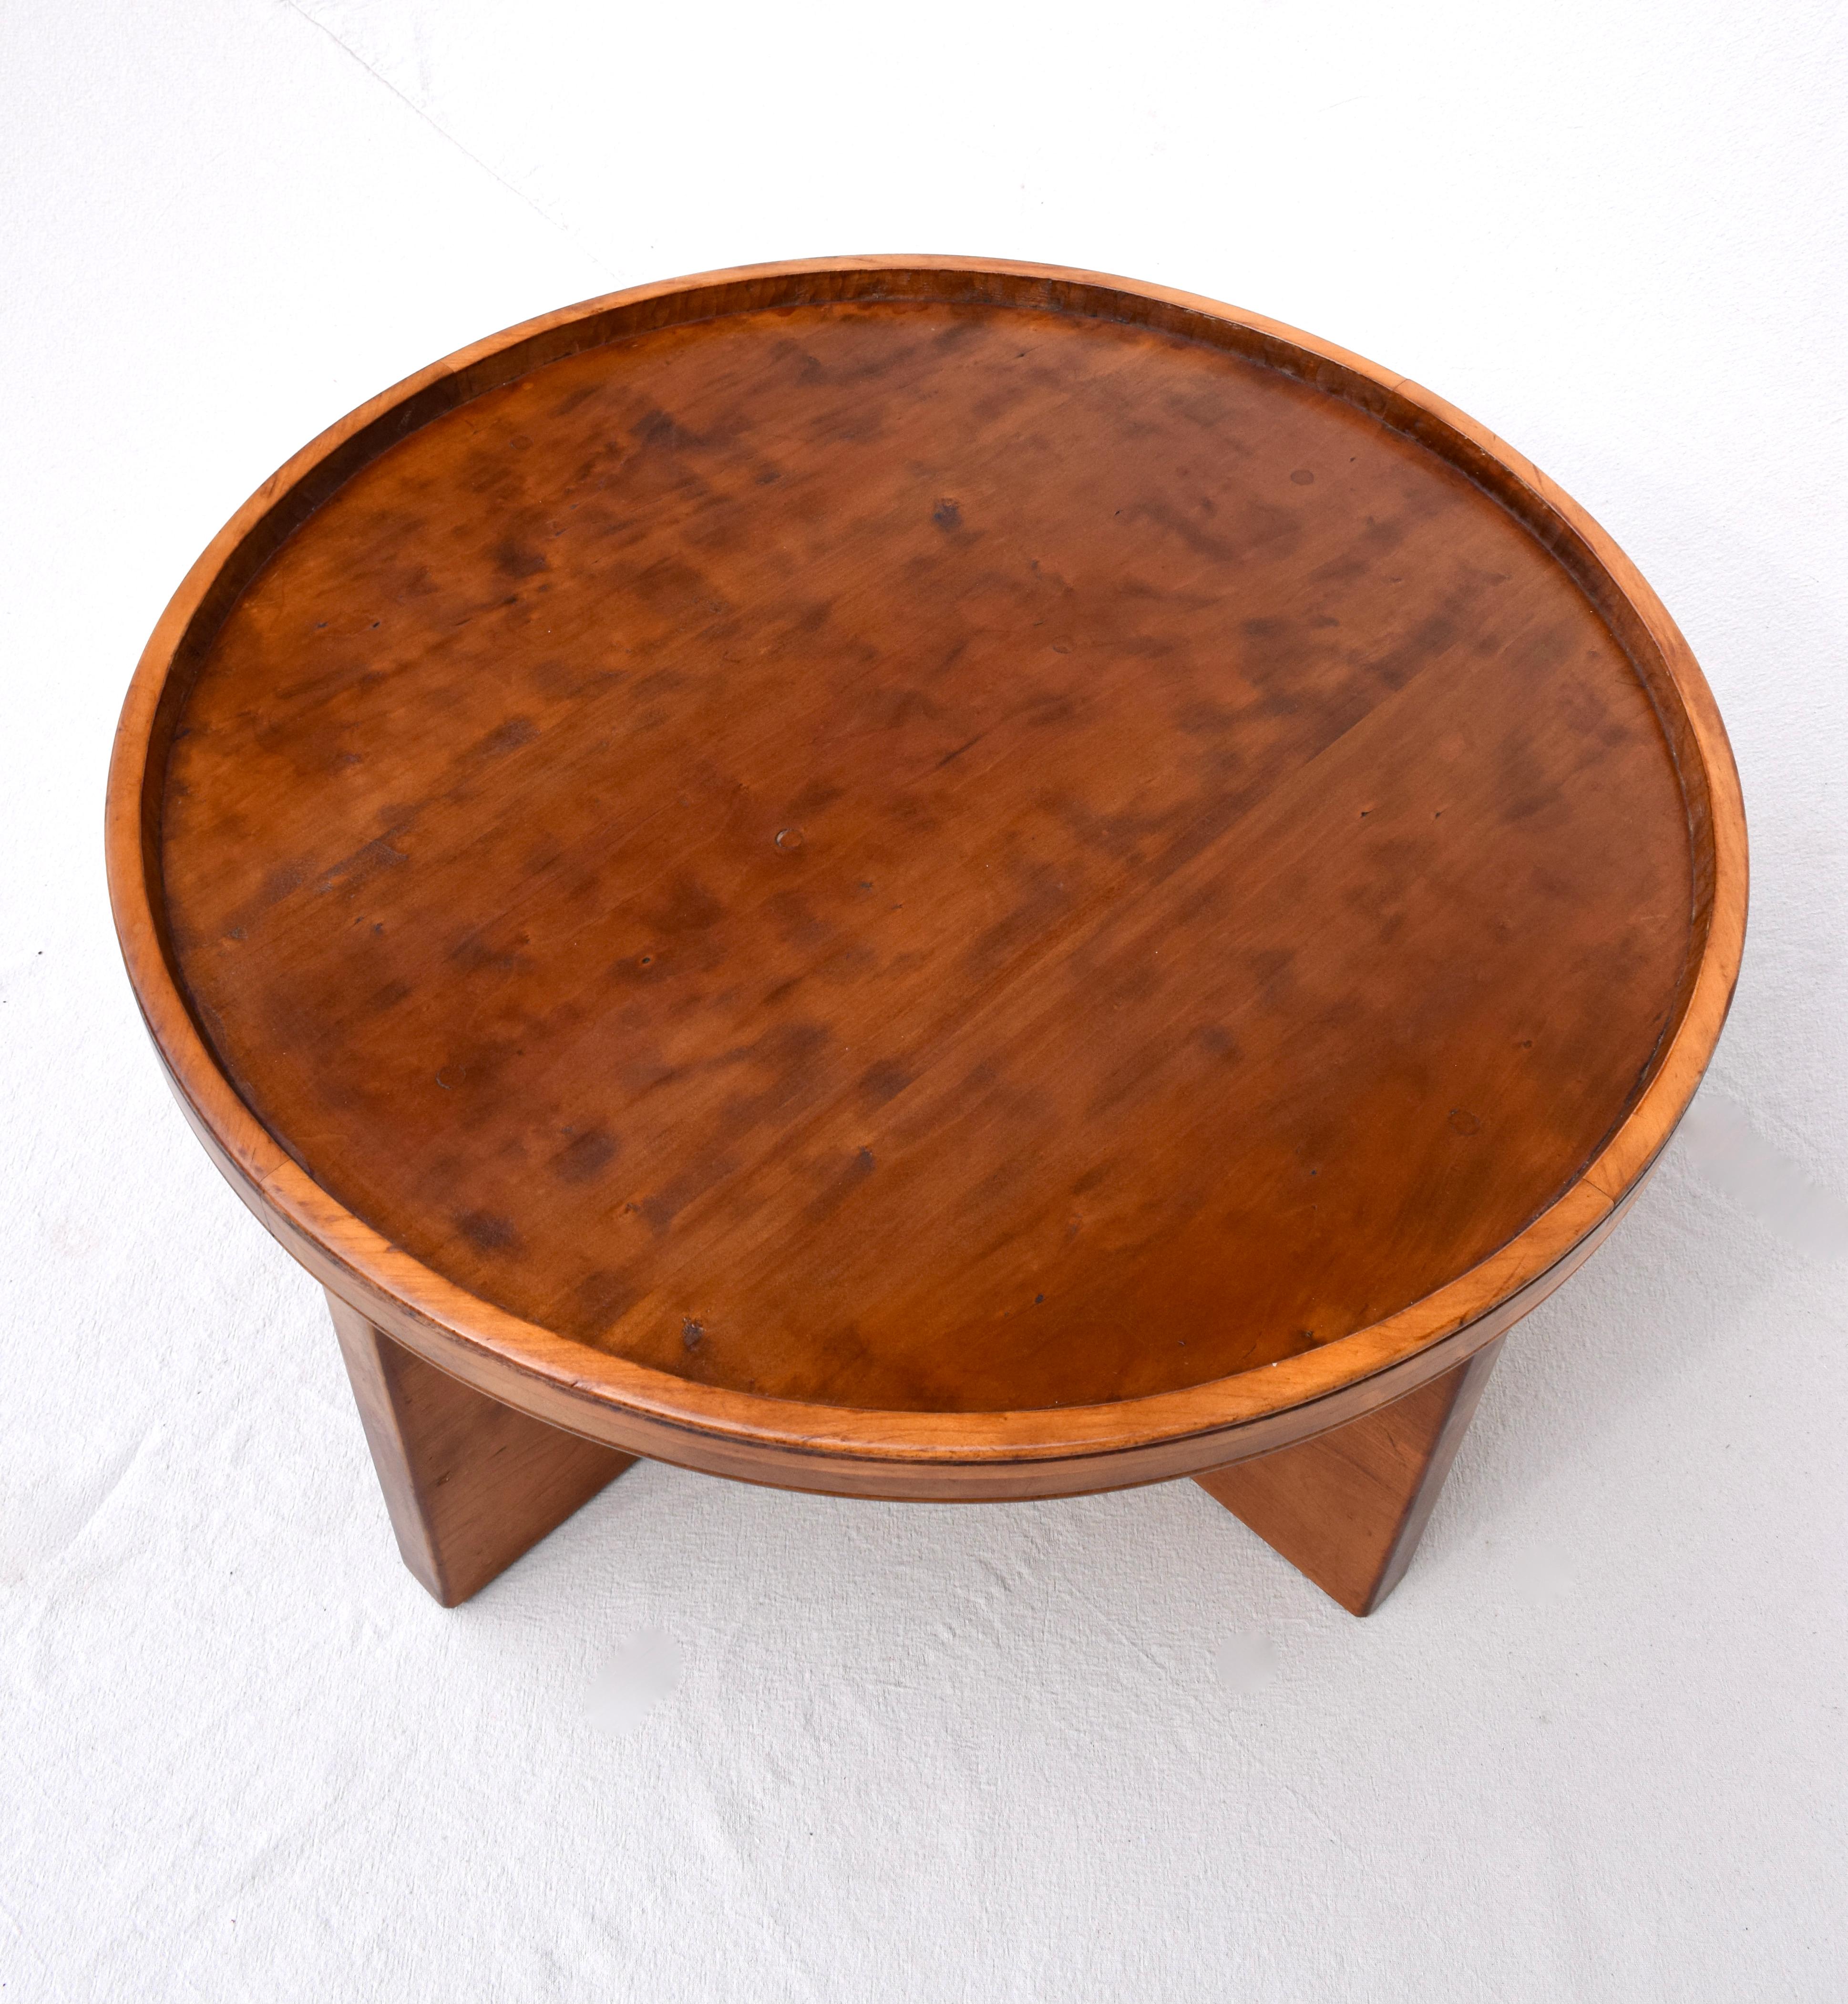 A solid wood cocktail or coffee table in the manner of Frank Lloyd Wright Taliesin for Henredon designs. A studio piece, the table is beautifully hand crafted and chiseled on the inside radius of the top. Especially substantial suitable for use as a